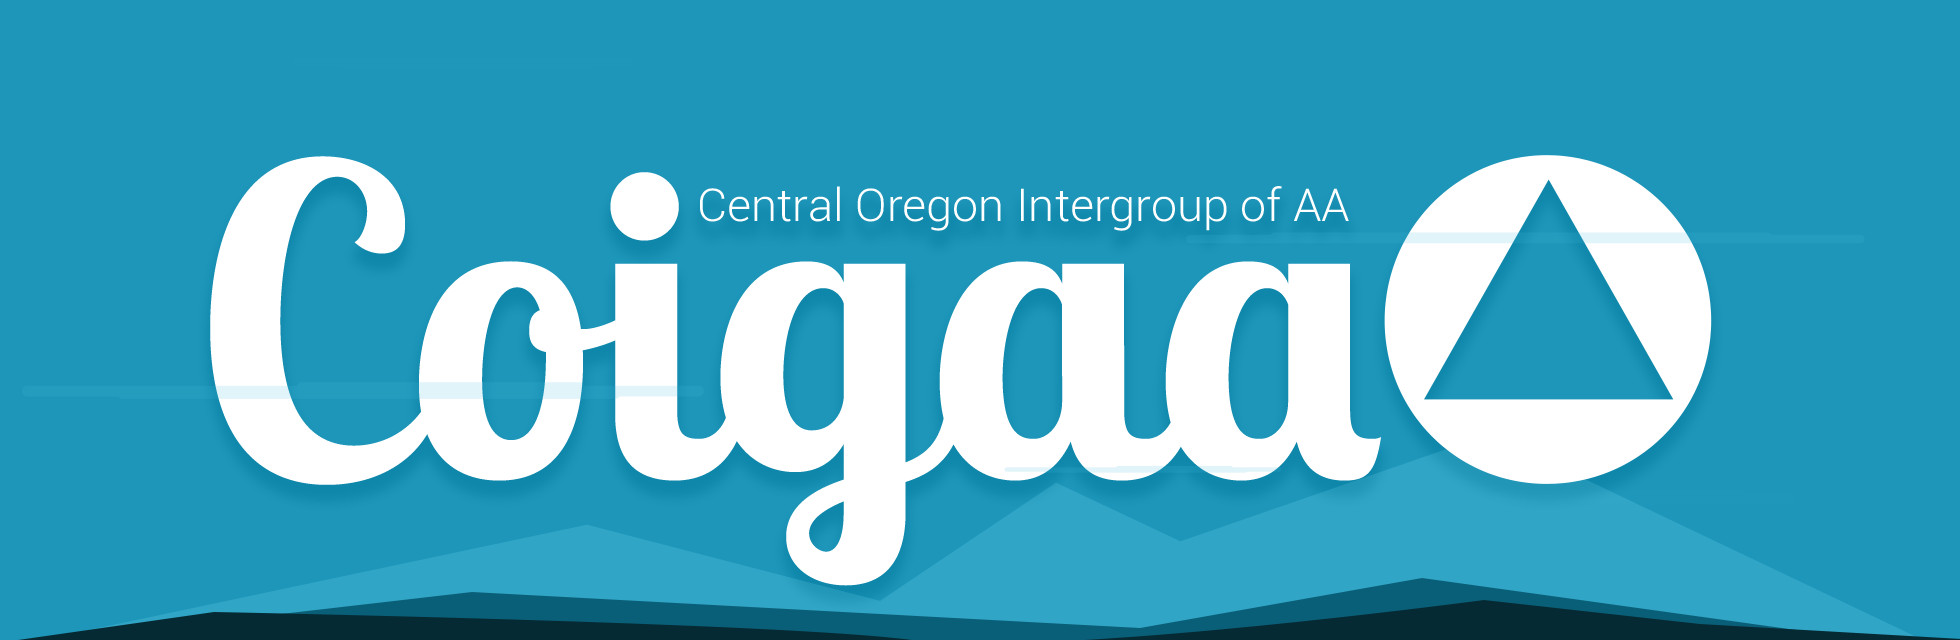 Central Oregon Intergroup of Alcoholics Anonymous